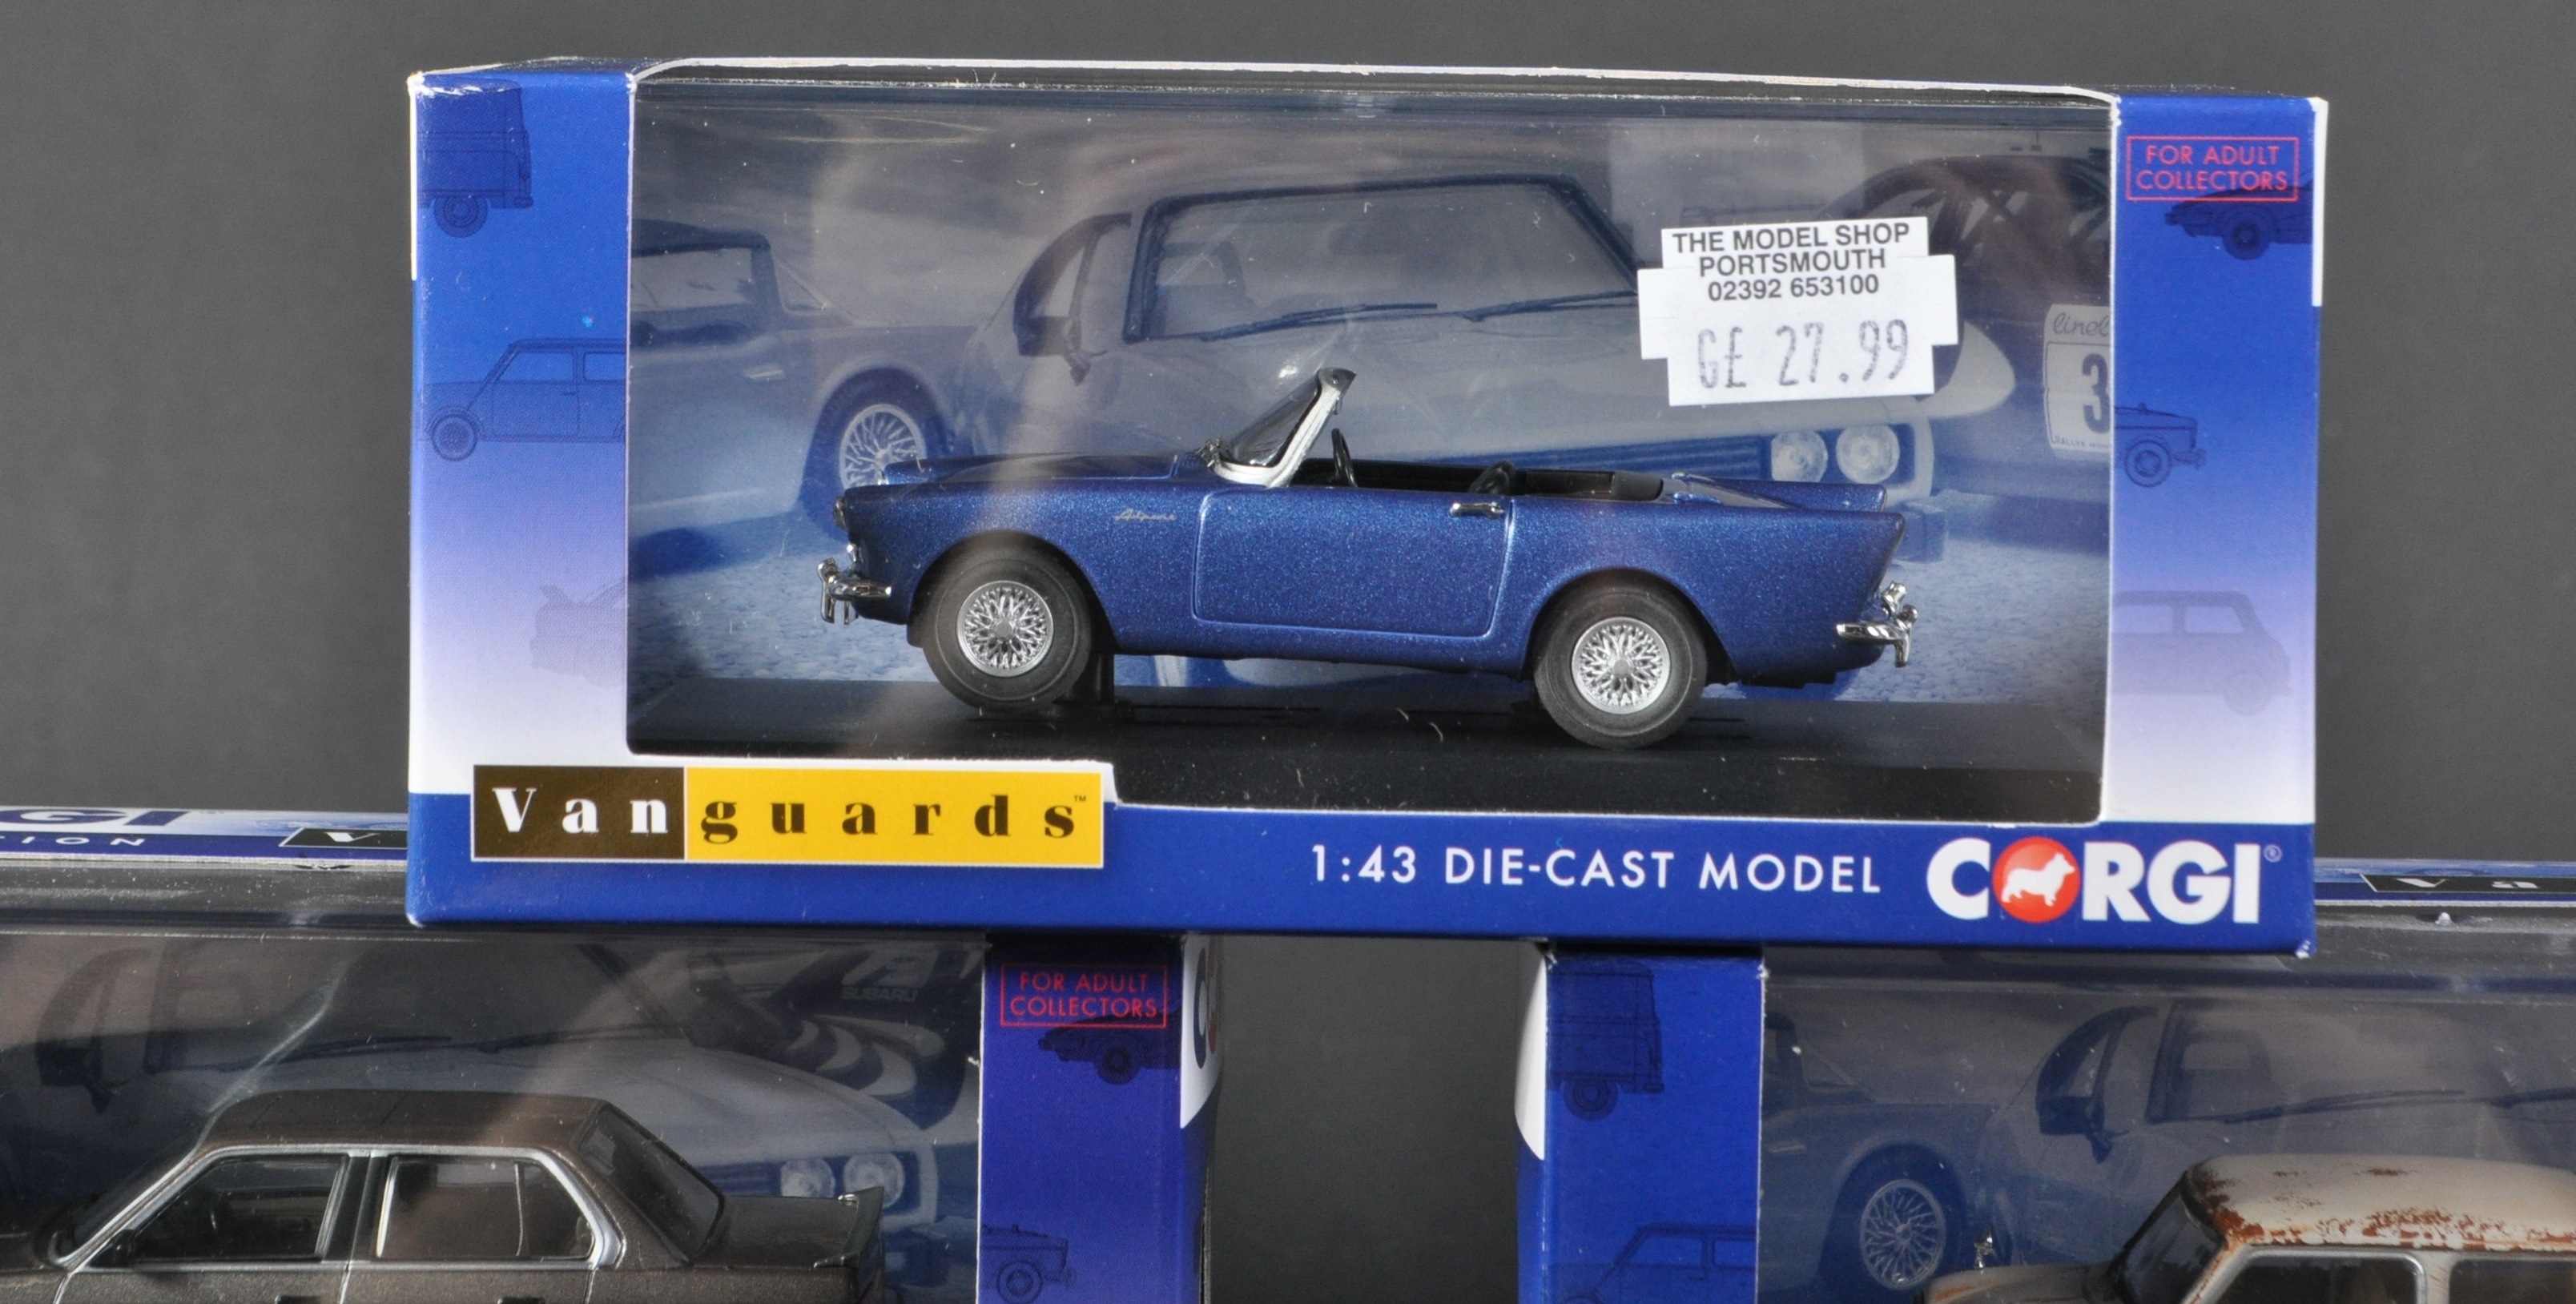 COLLECTION OF CORGI VANGUARDS 1/43 SCALE DIECAST MODEL CARS - Image 3 of 6